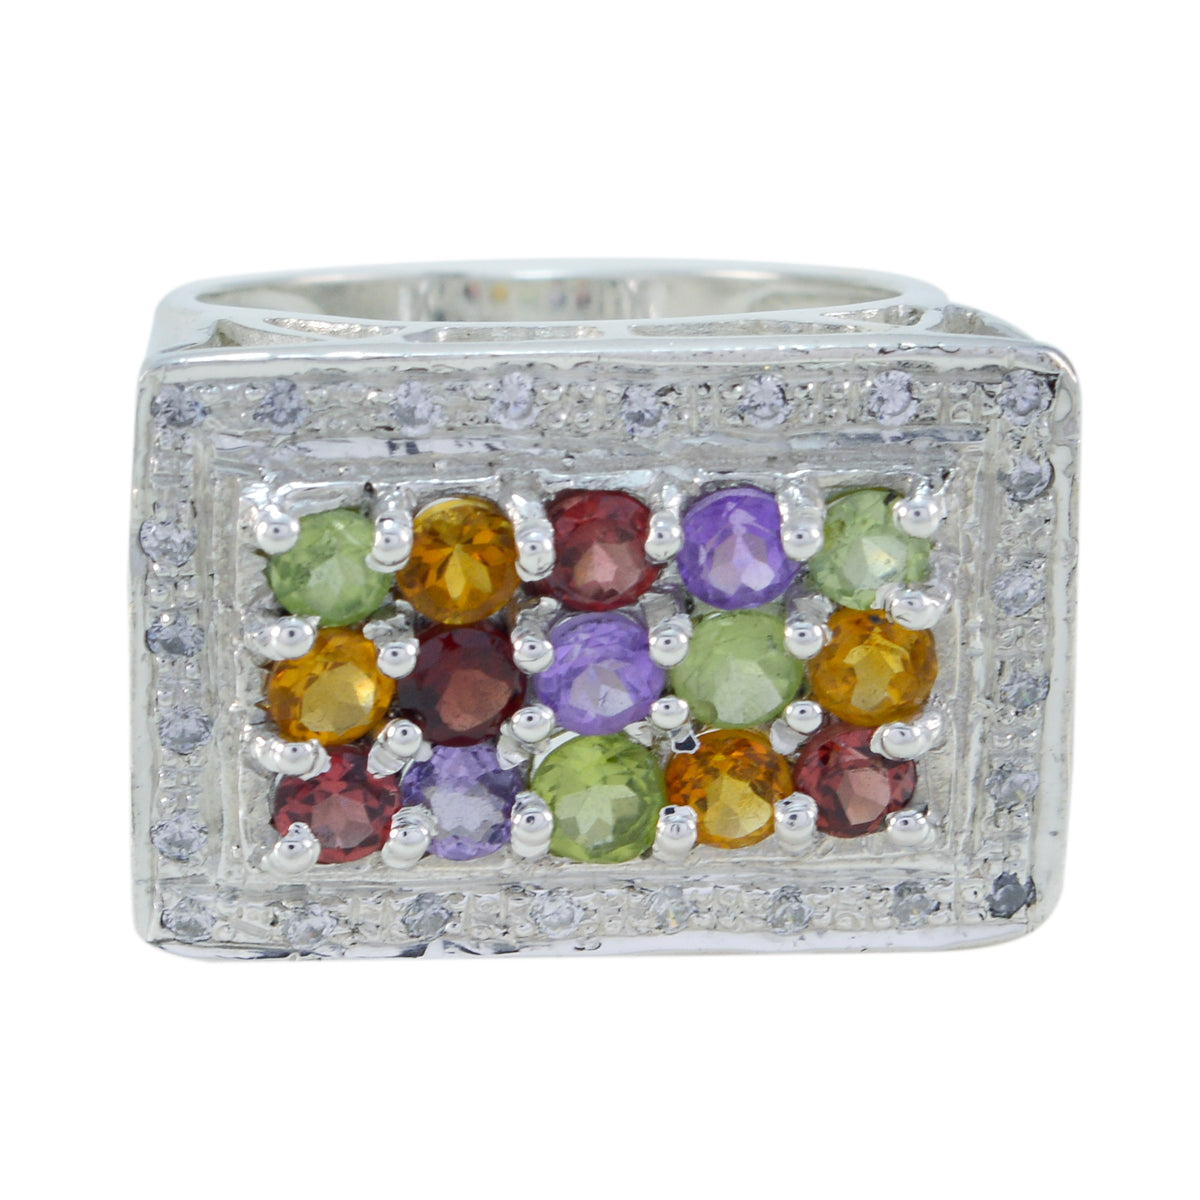 Riyo Hot Gem Multi Stone Silver Ring Candles With Jewelry Inside